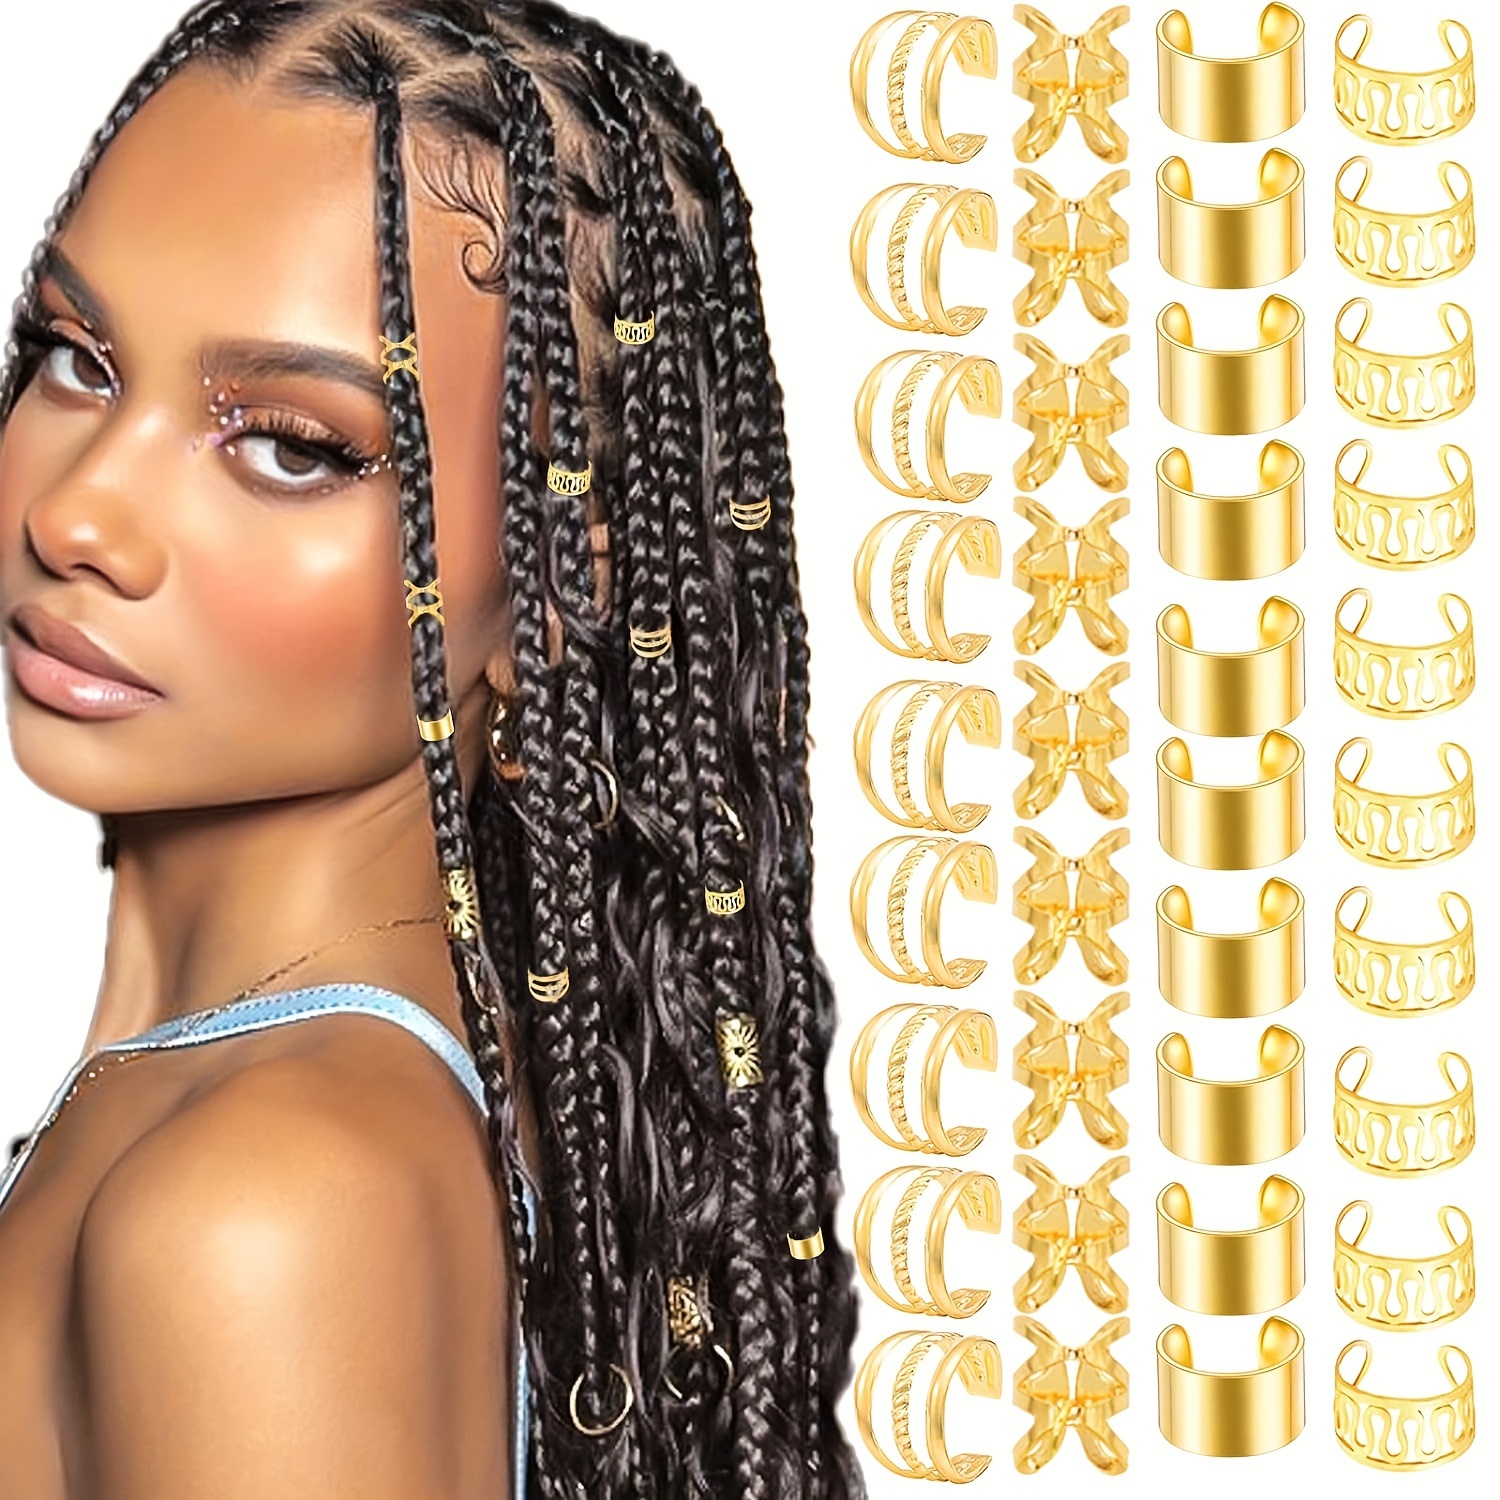 

40pcs Solid Color Hollow Out Hair Rings Trendy Braid Rings Stylish Hair Decoration For Women And Daily Use Wear